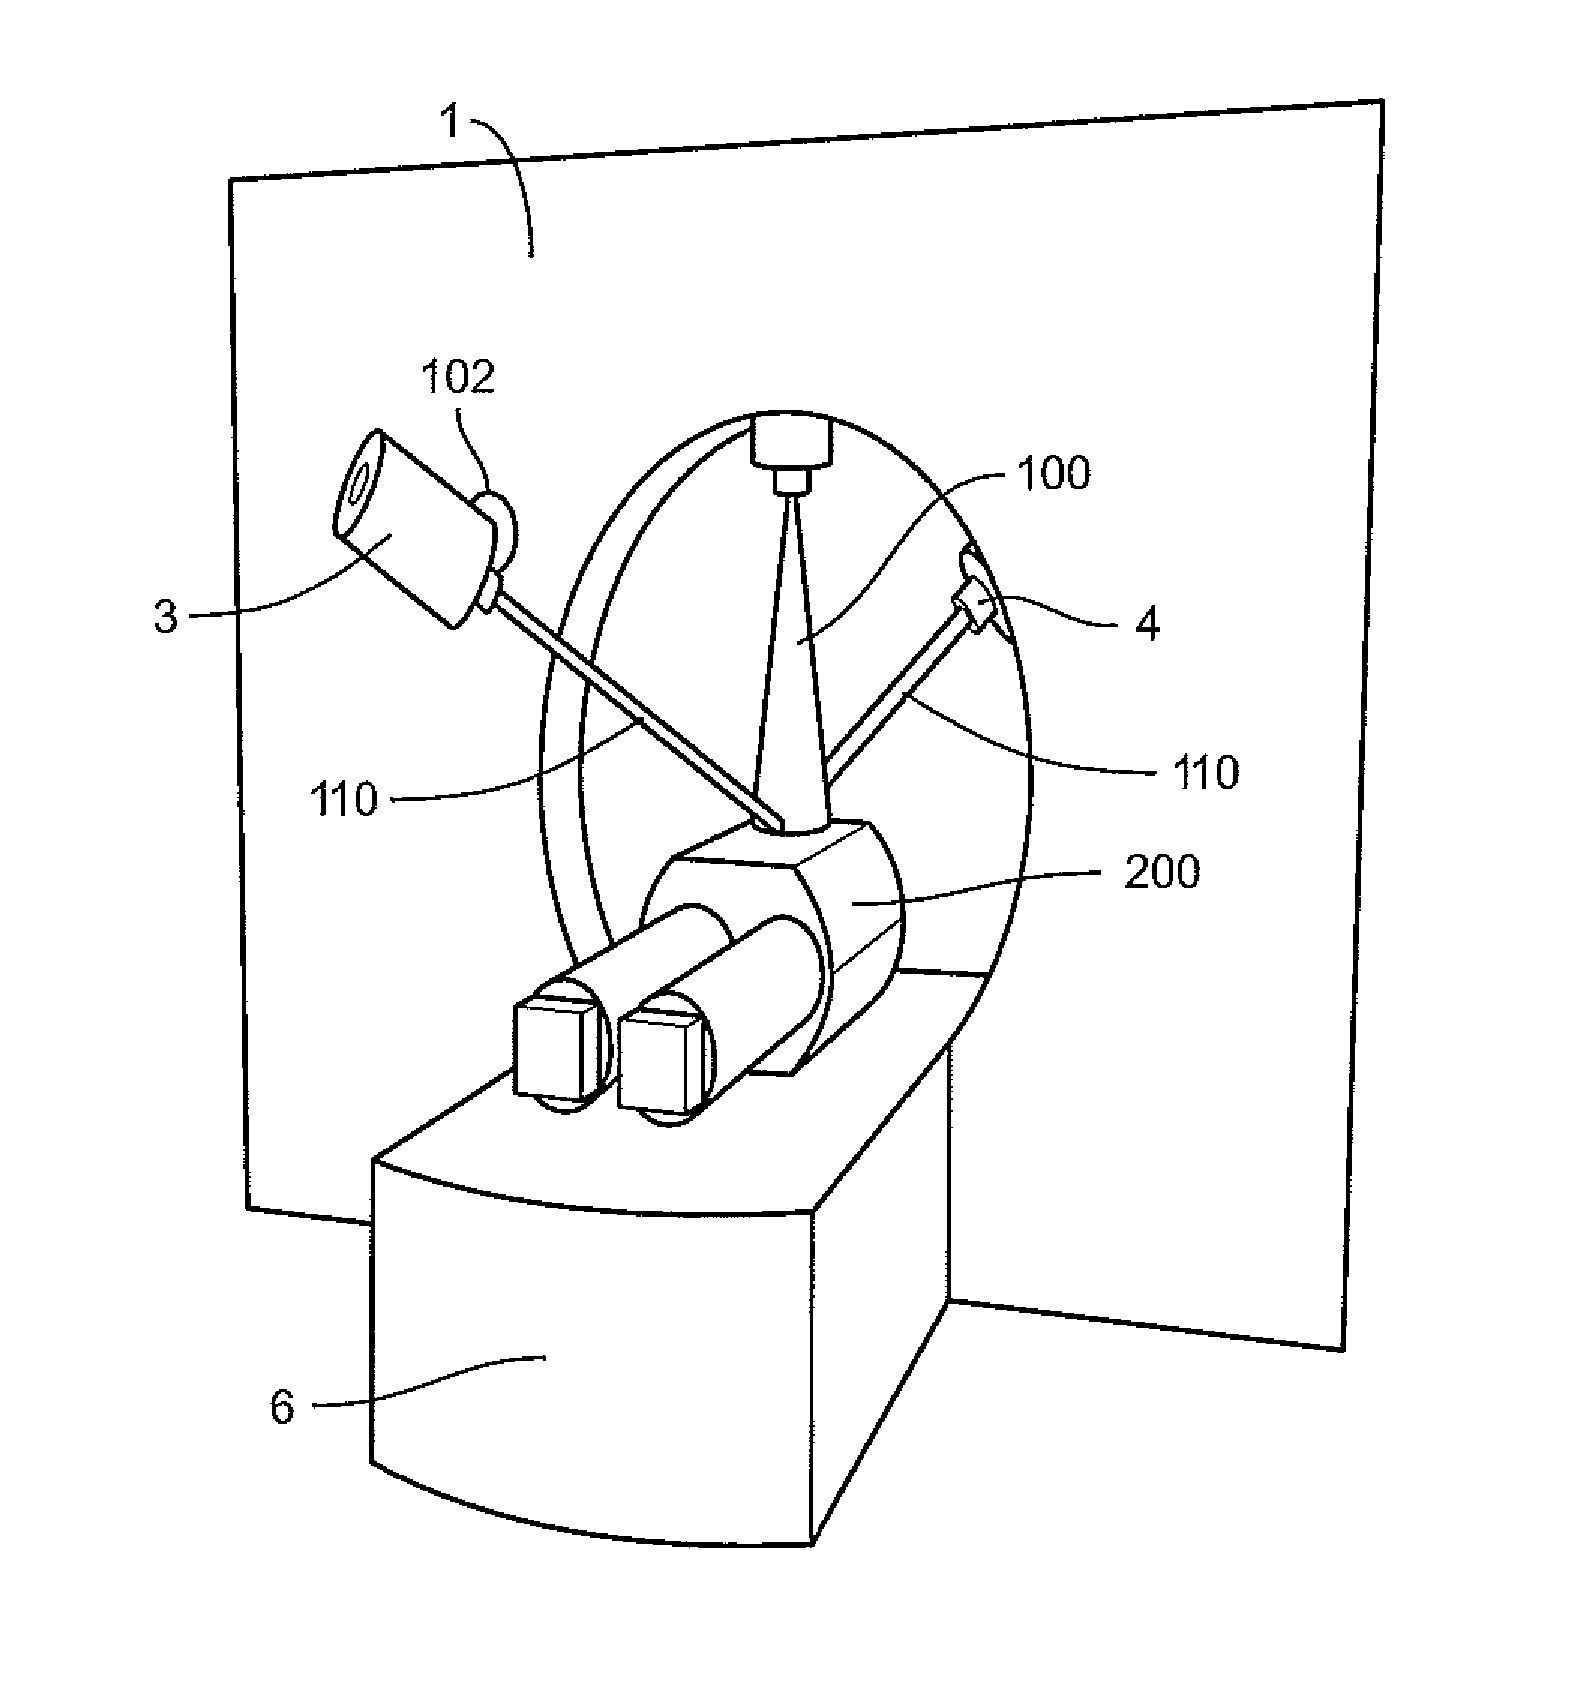 Apparatus and method to carry out image guided radiotherapy with kilo-voltage X-ray beams in the presence of a contrast agent